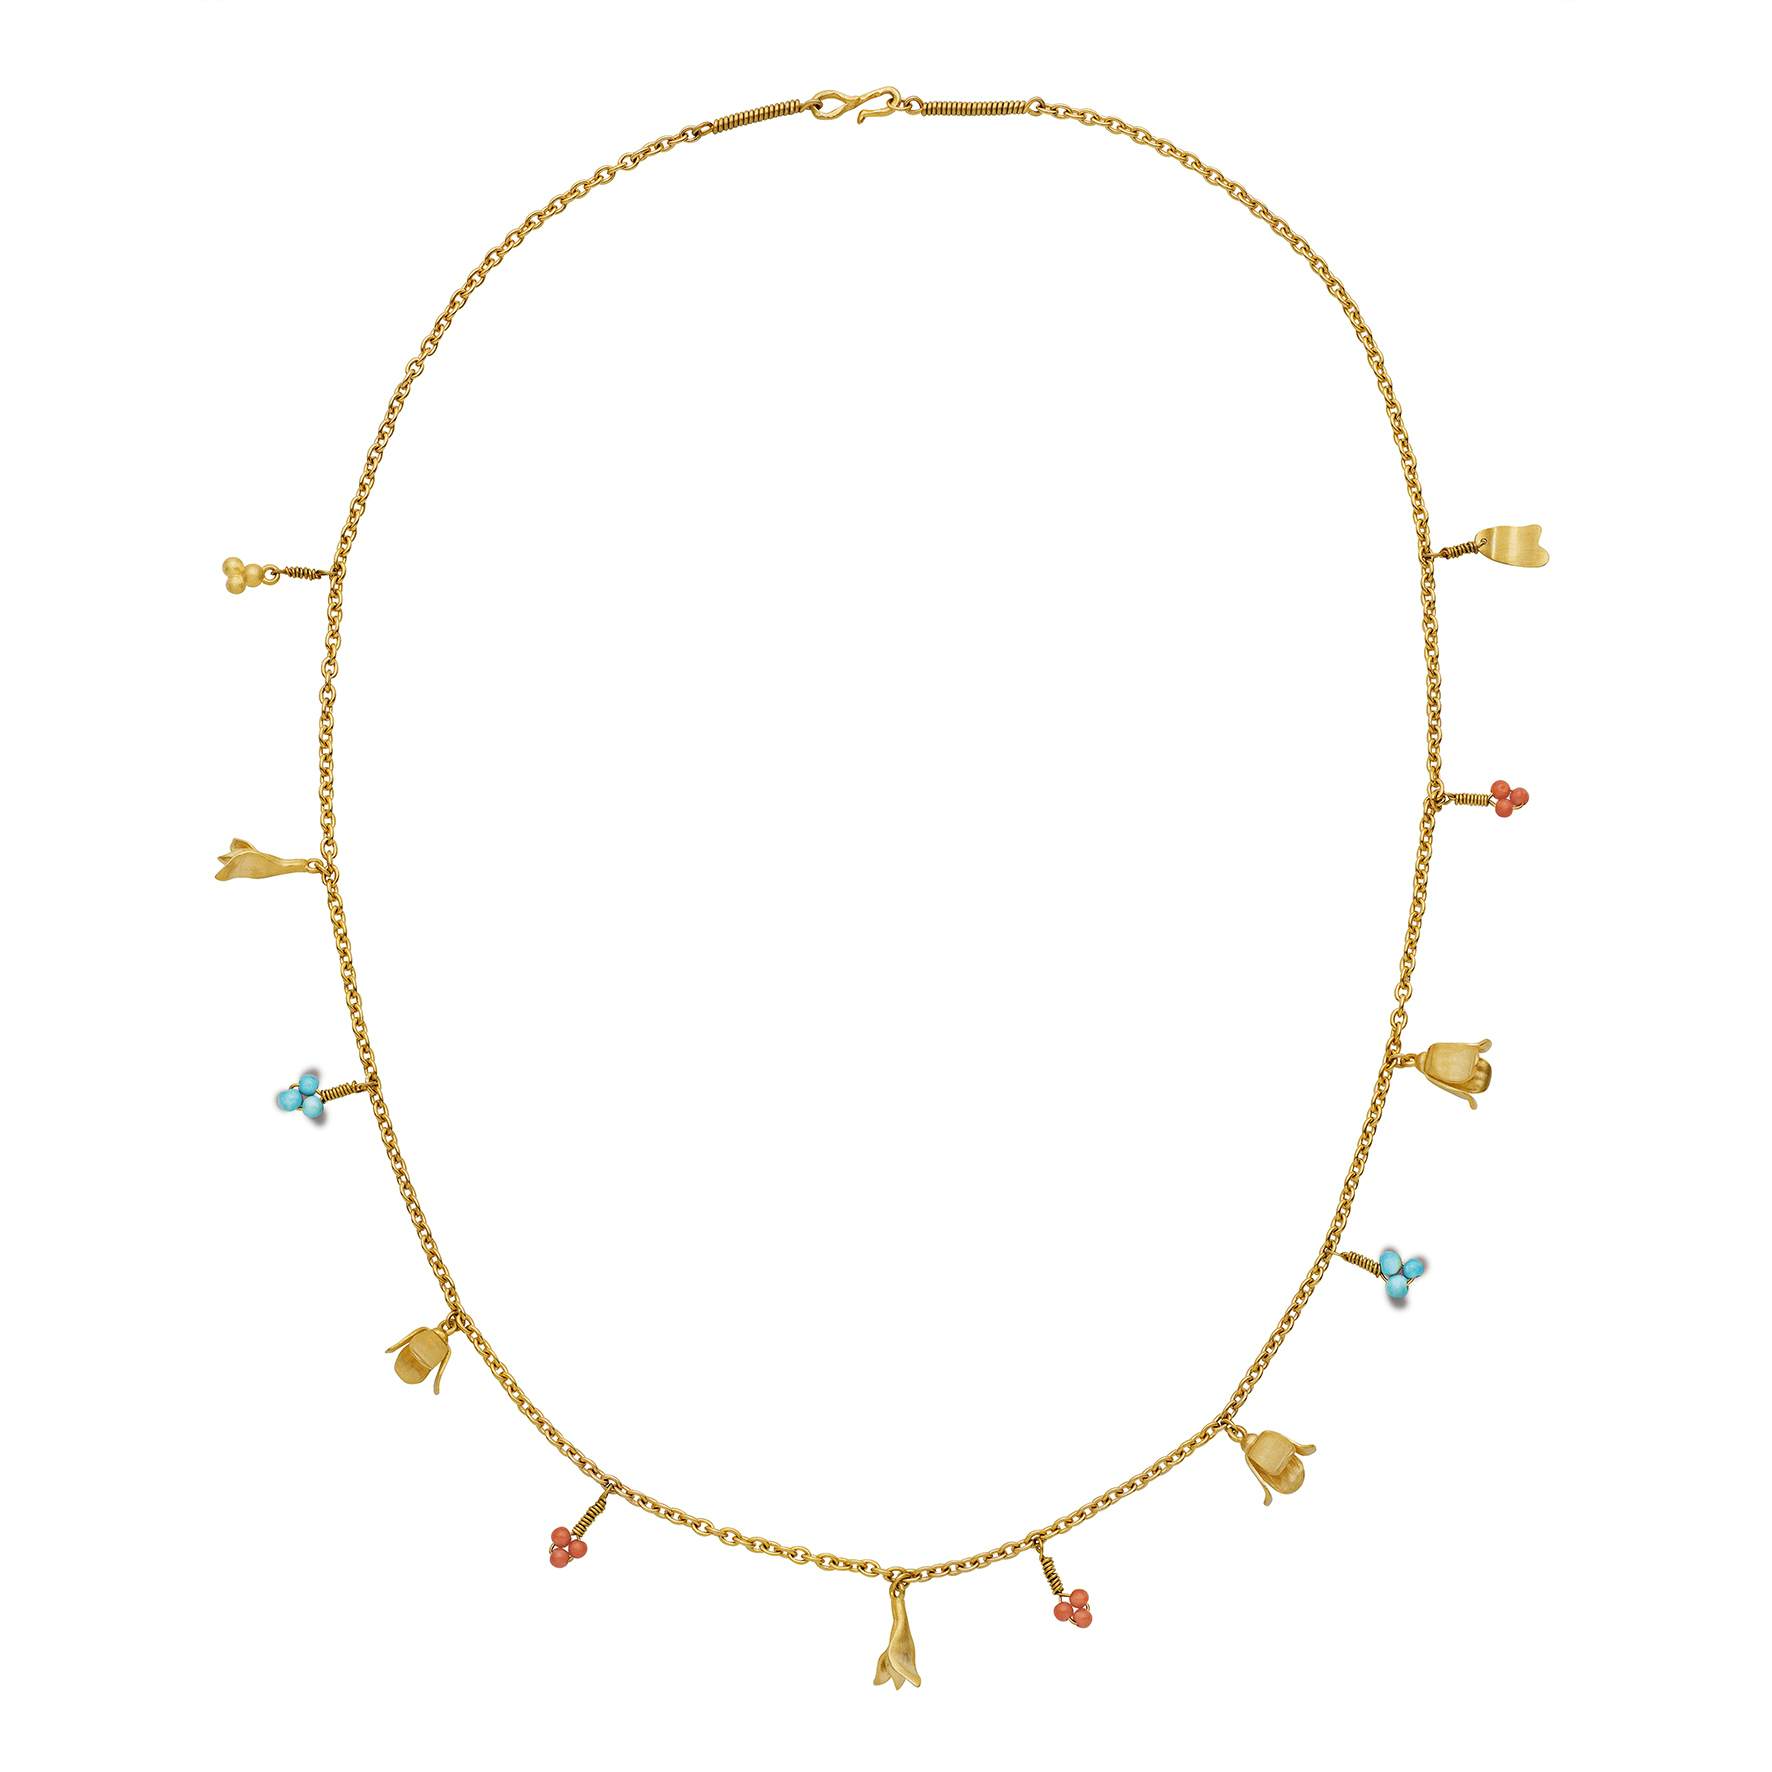 Bluebell Necklace from Maanesten in Goldplated-Silver Sterling 925| Turquoise,Coral